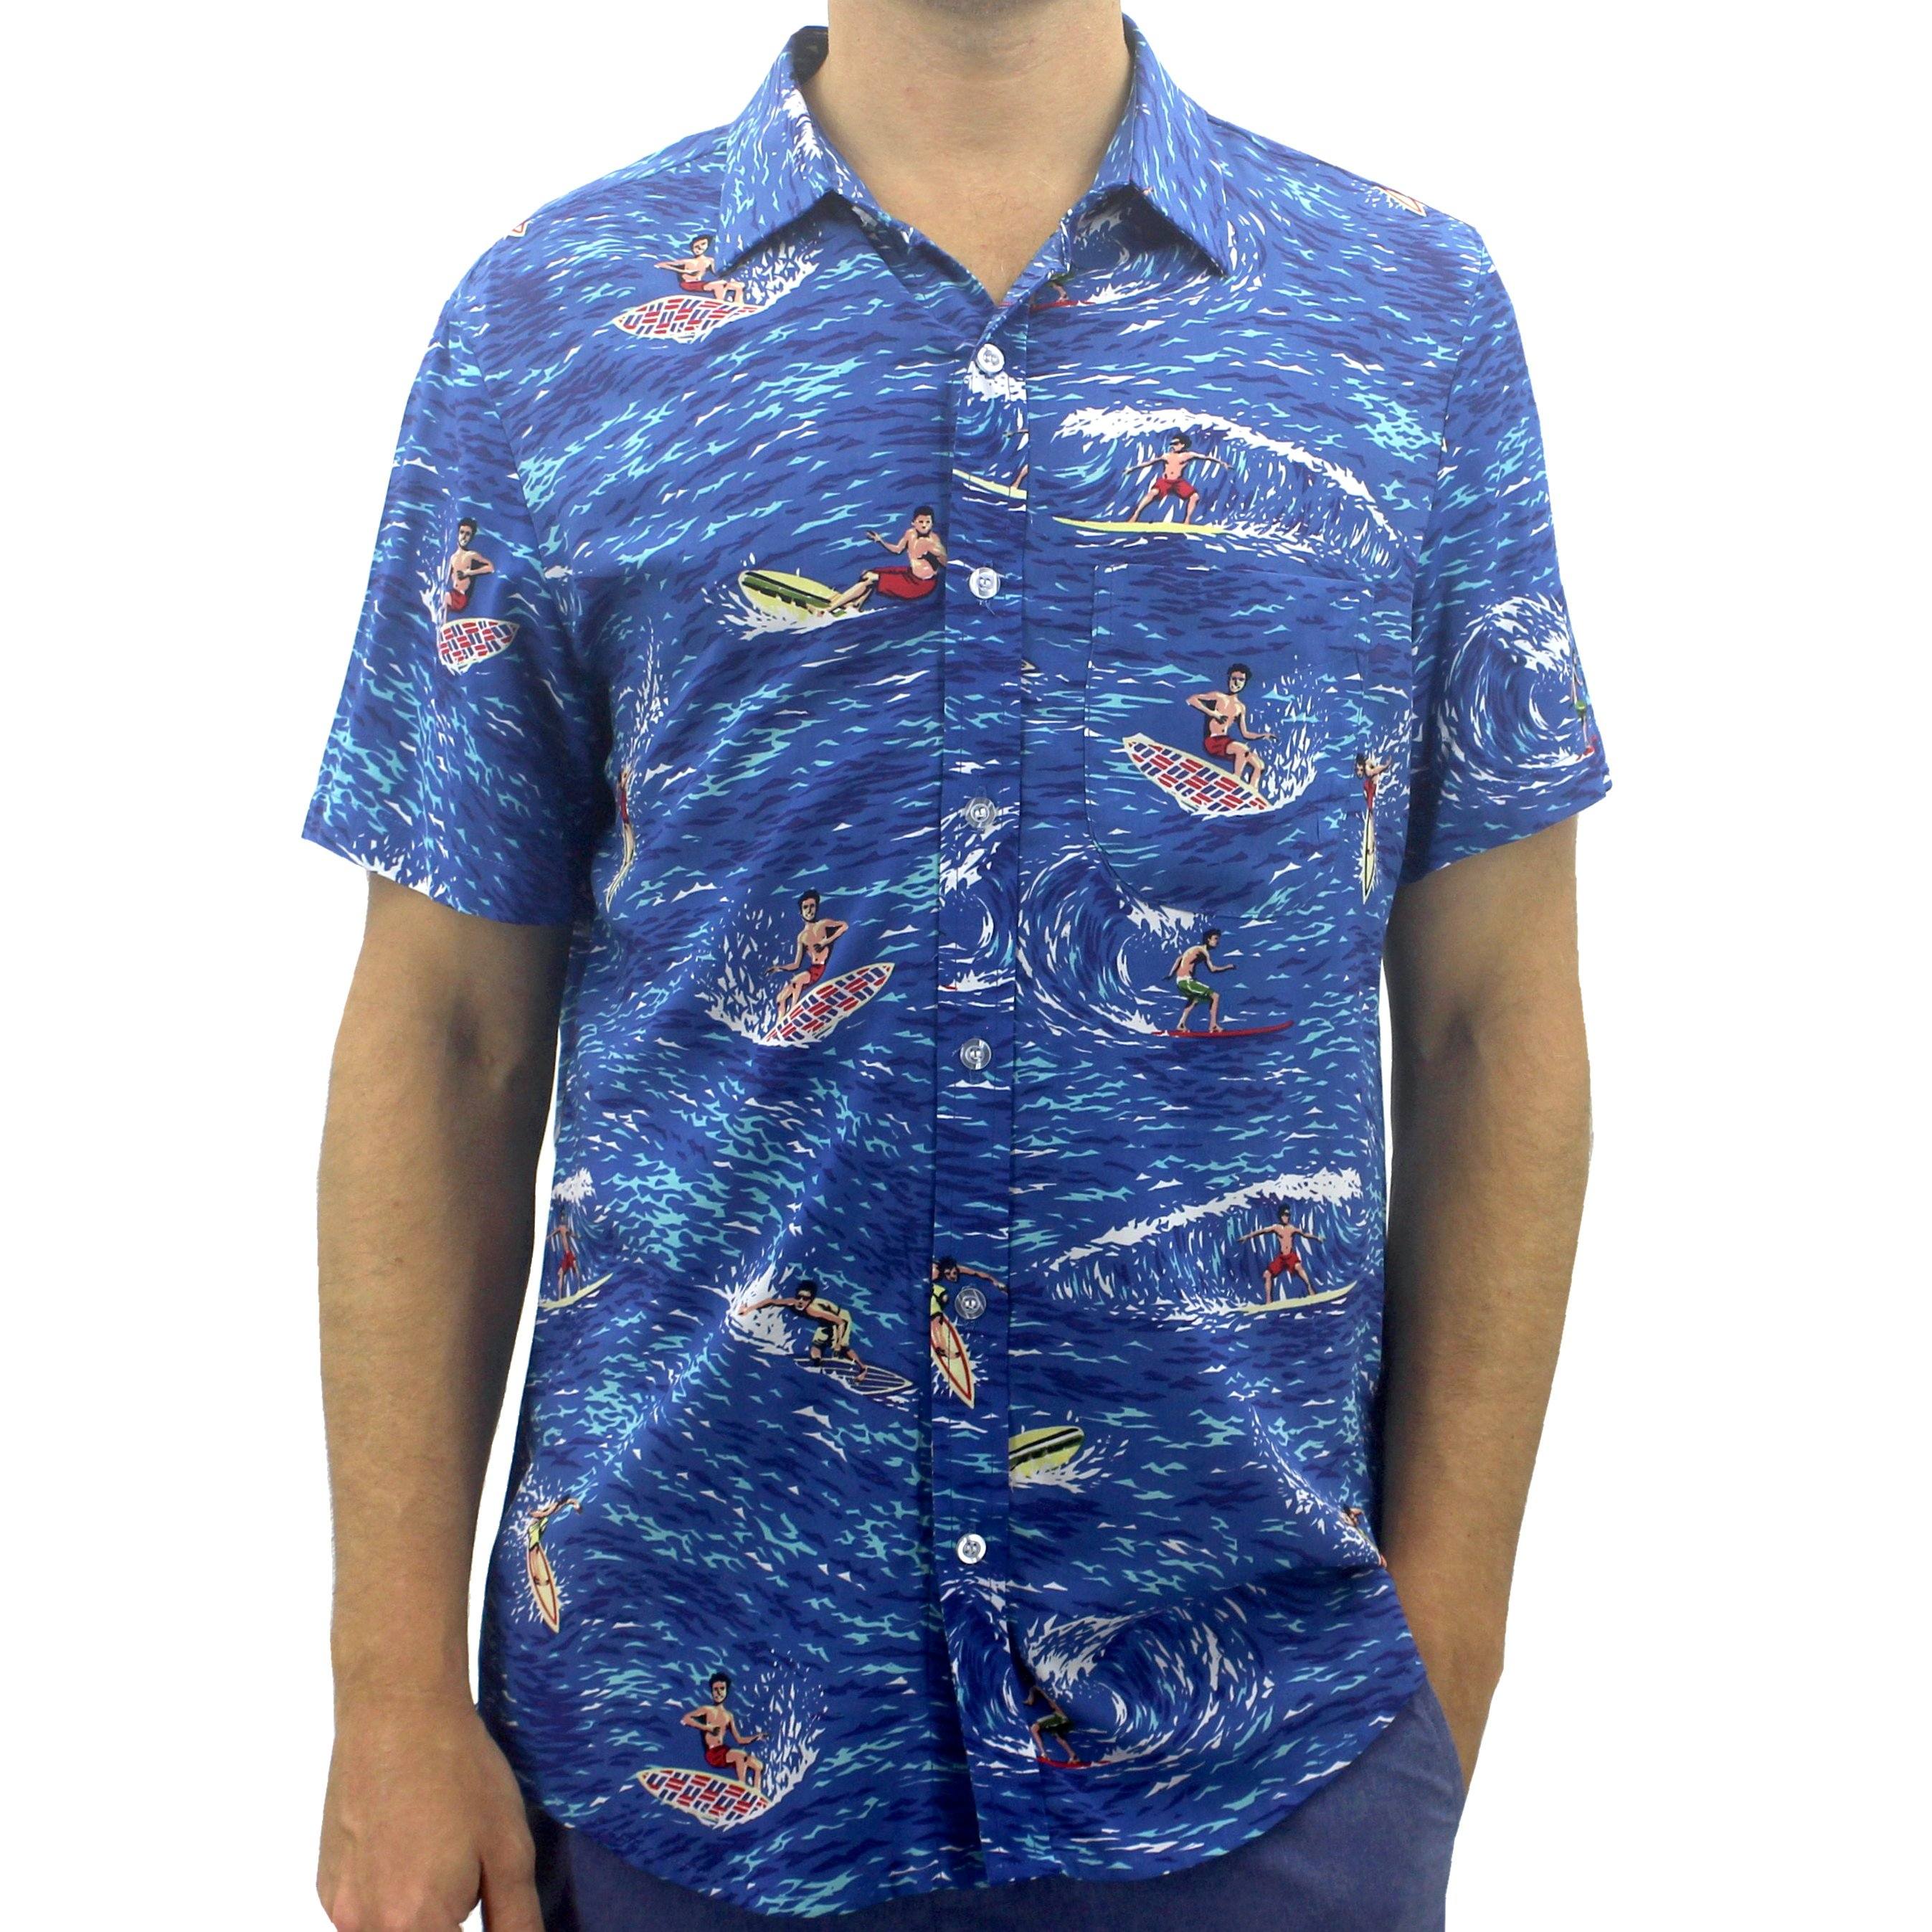 Rock Atoll Men's Casual Summer Hawaiian Shirt for Surfers with Surfing Surfboard Print